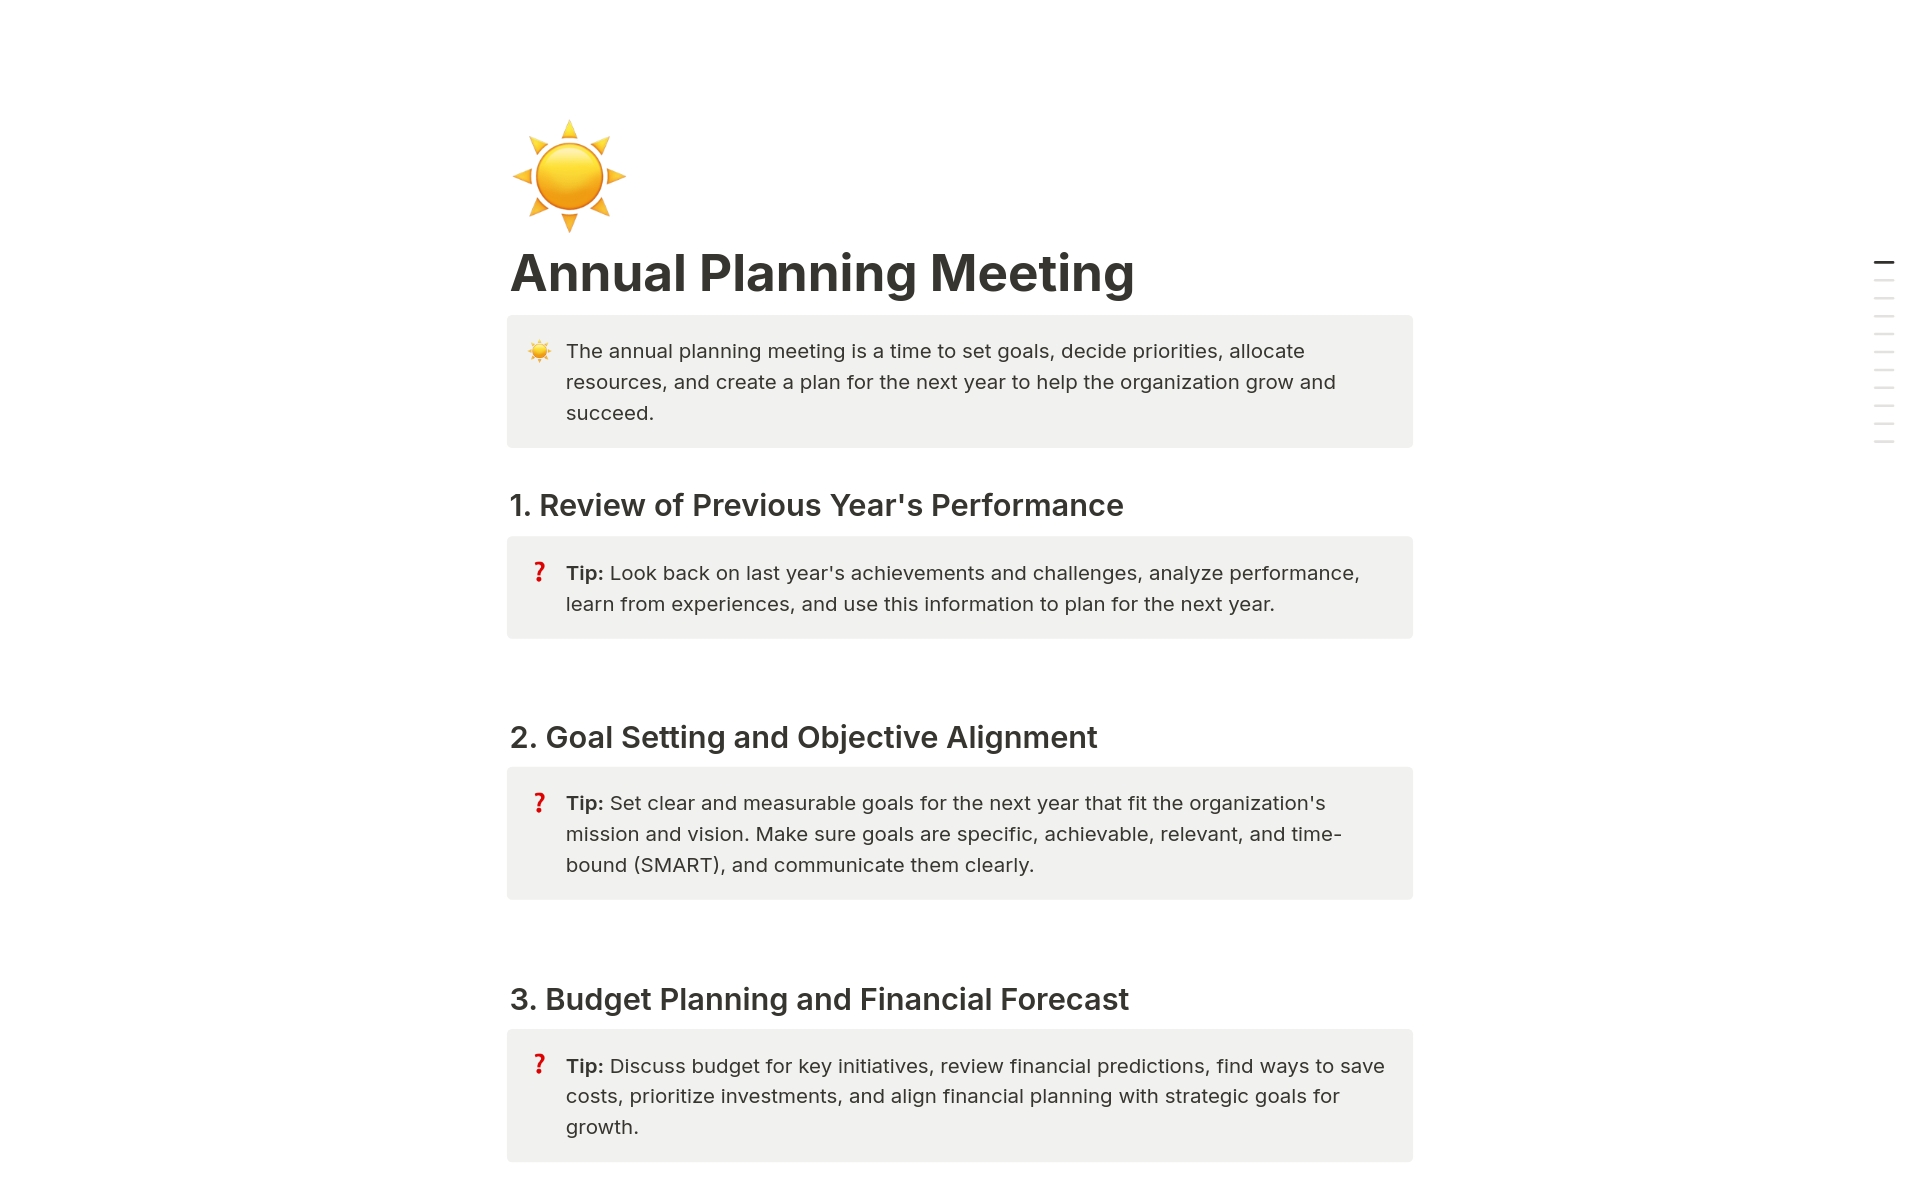 The annual planning meeting is a time to set goals, decide priorities, allocate resources, and create a plan for the next year to help the organization grow and succeed.